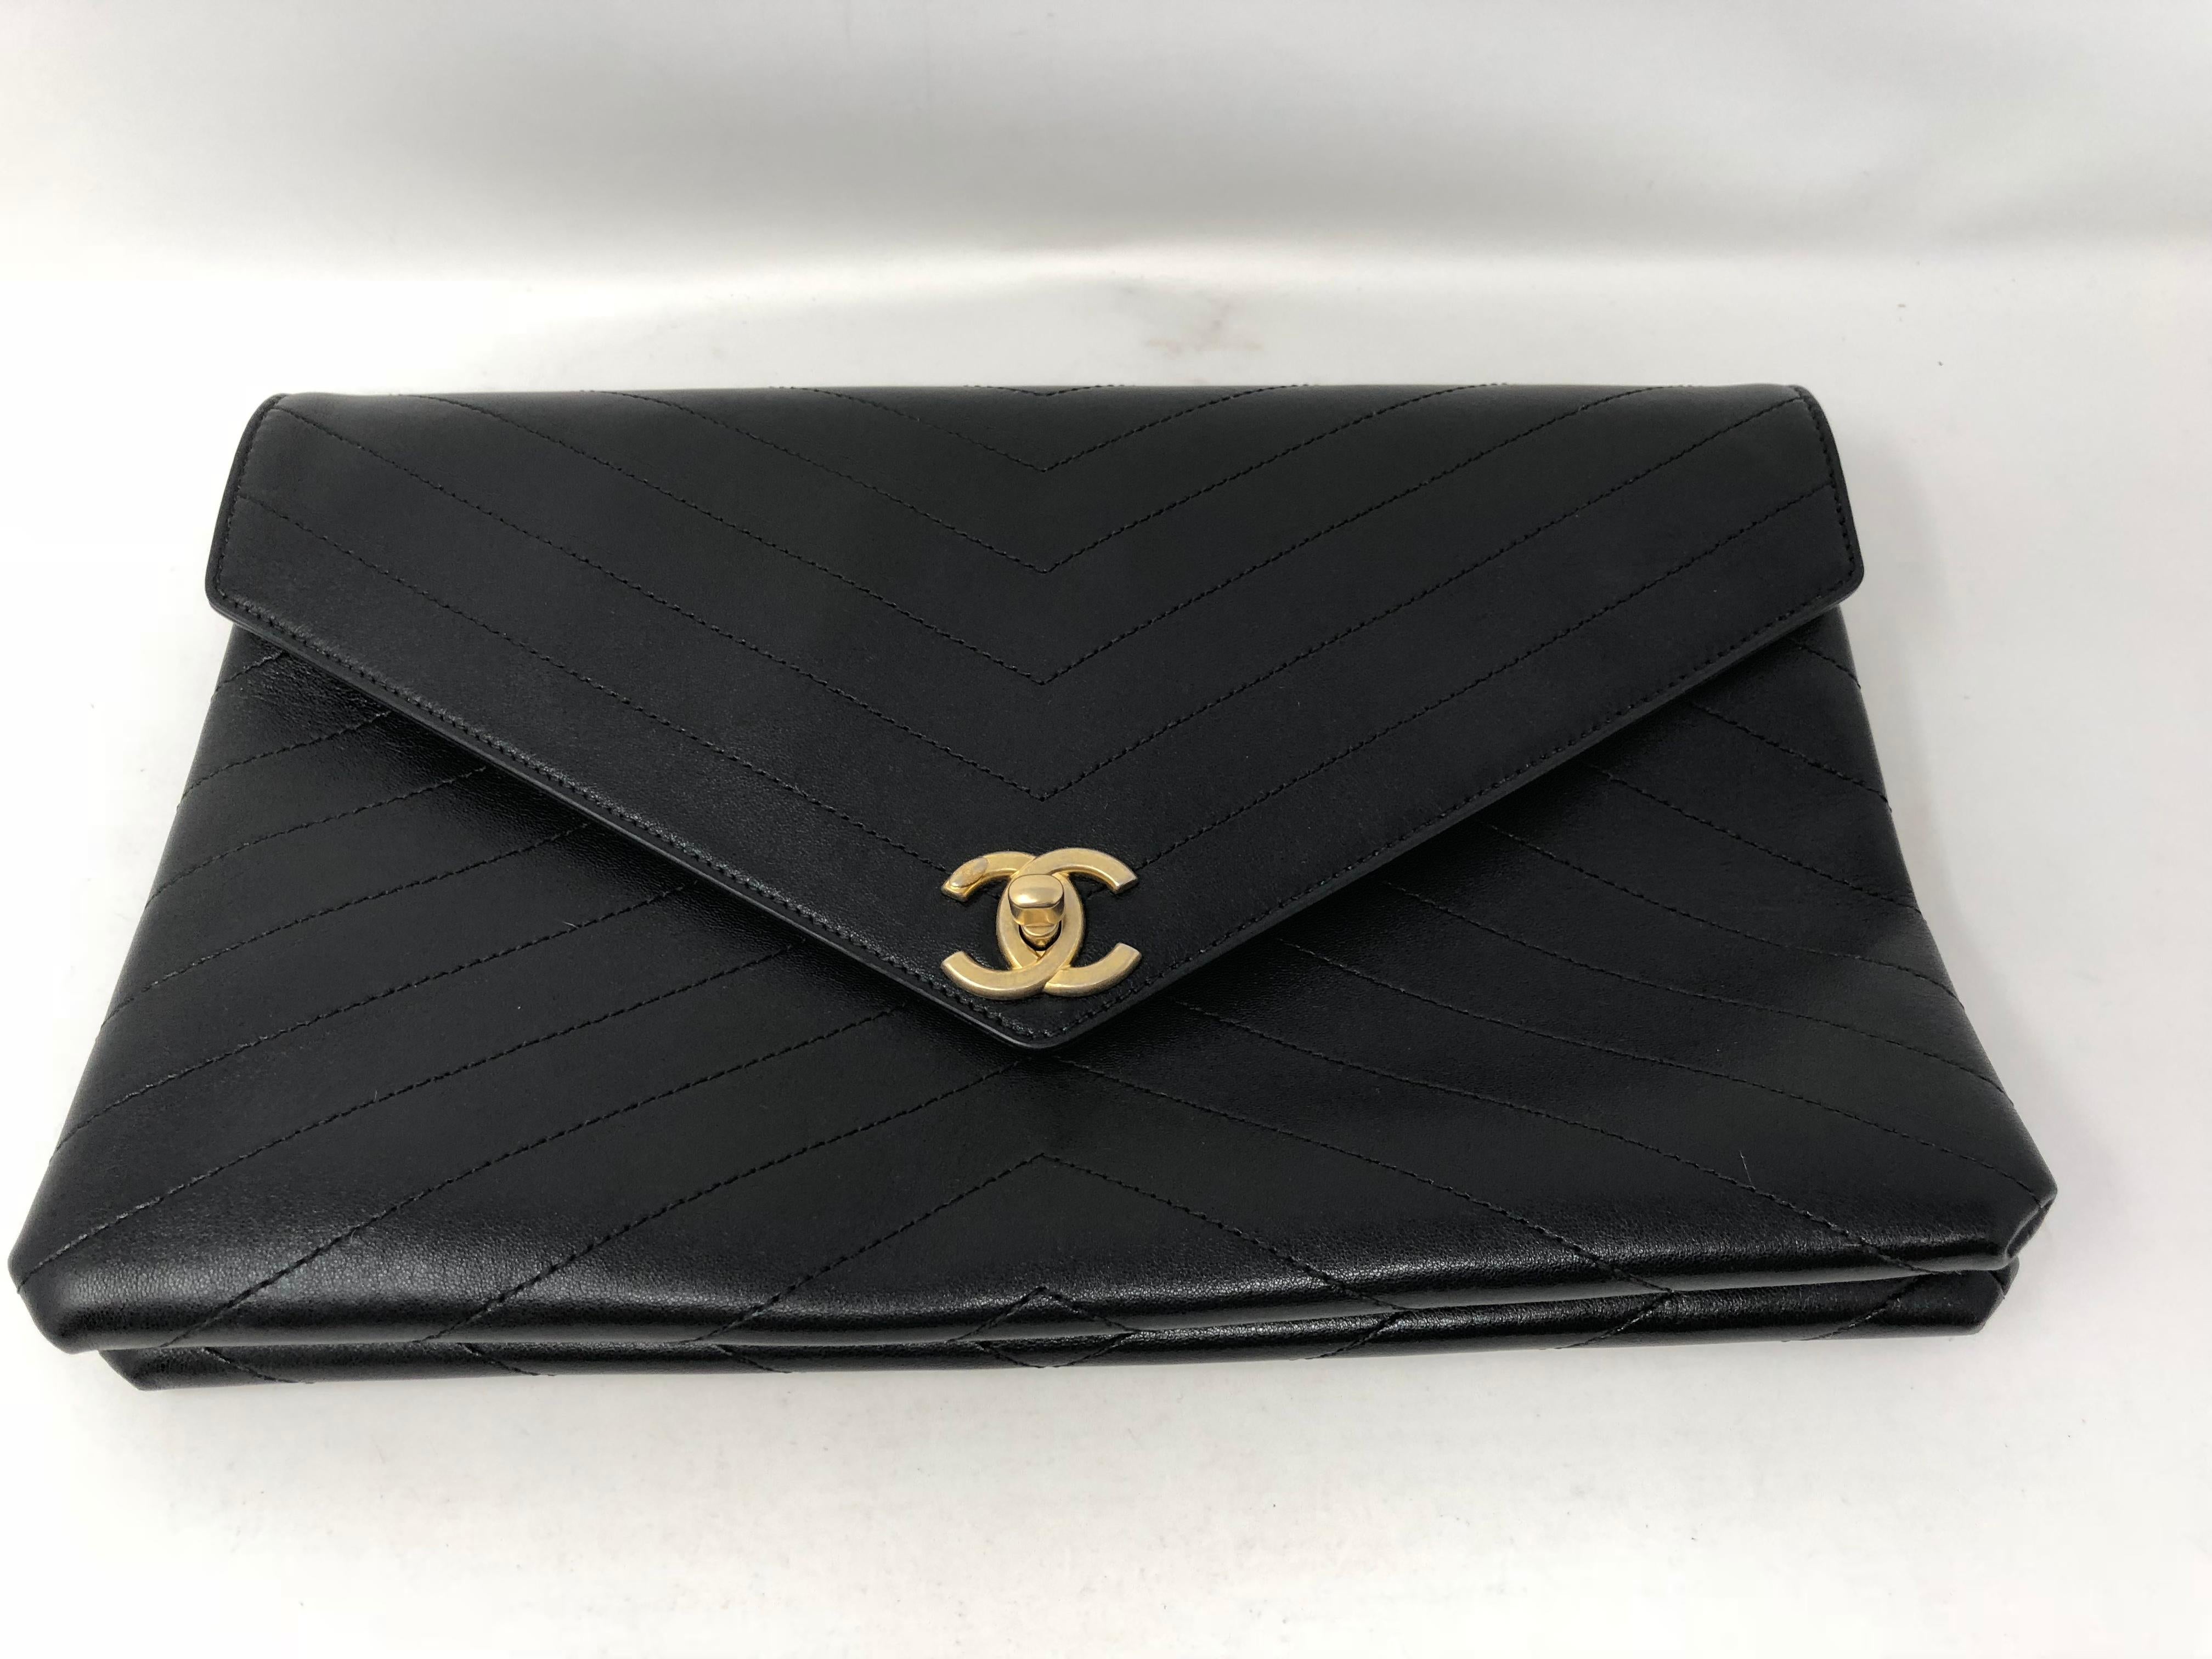 Chanel Black Envelope Clutch in Chevron pattern with gold hardware. Bigger size clutch to hold all your essentials. A classic piece to add to your collection. Excellent condition. Guaranteed authentic. 